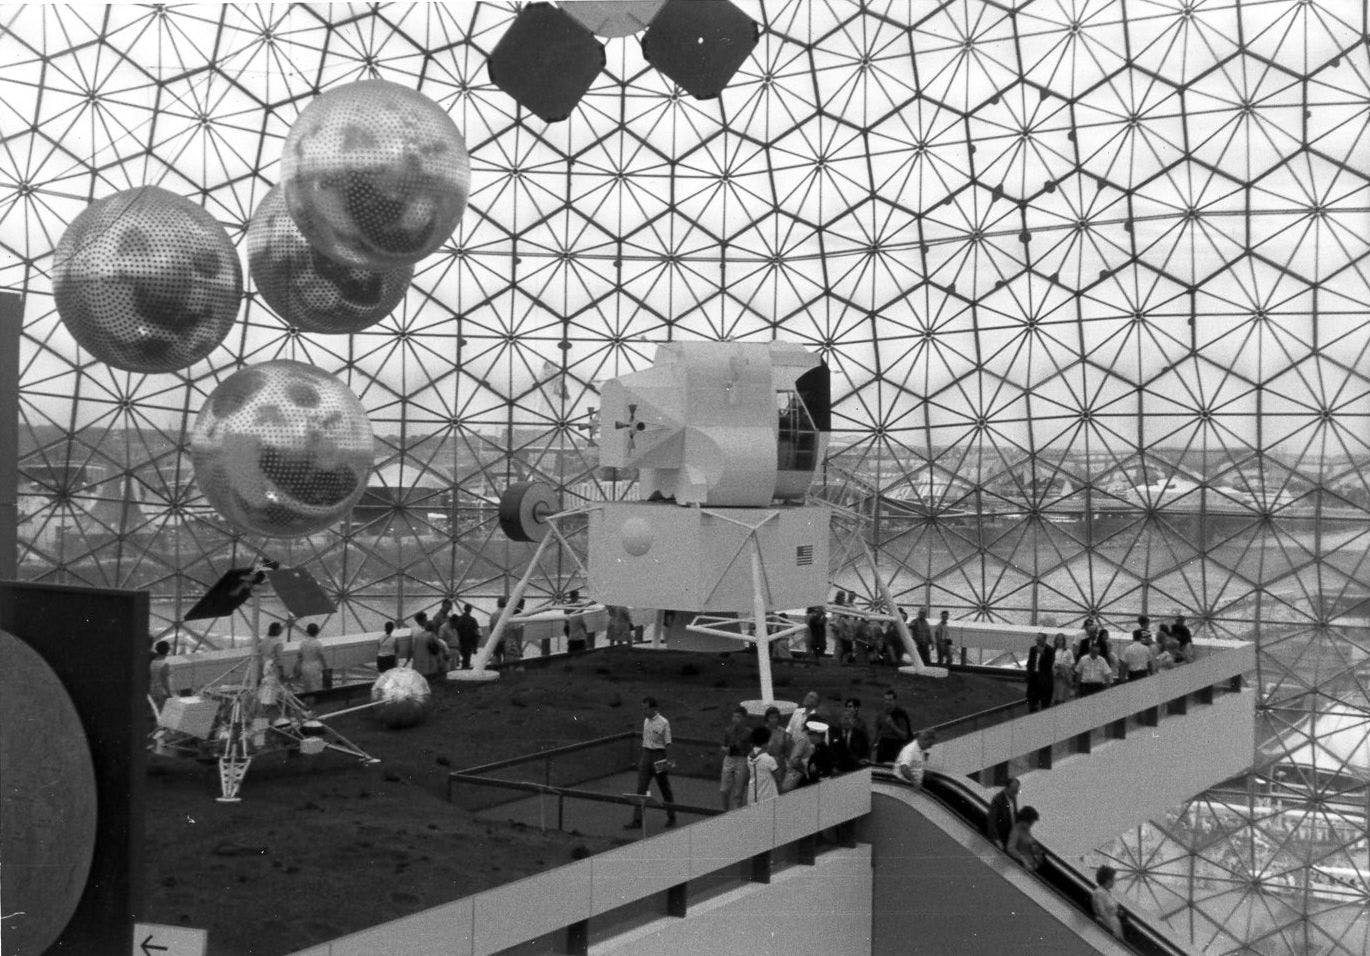  American Pavilion at Expo ’67 in Montreal, Quebec. Photo by Della Charlton.   